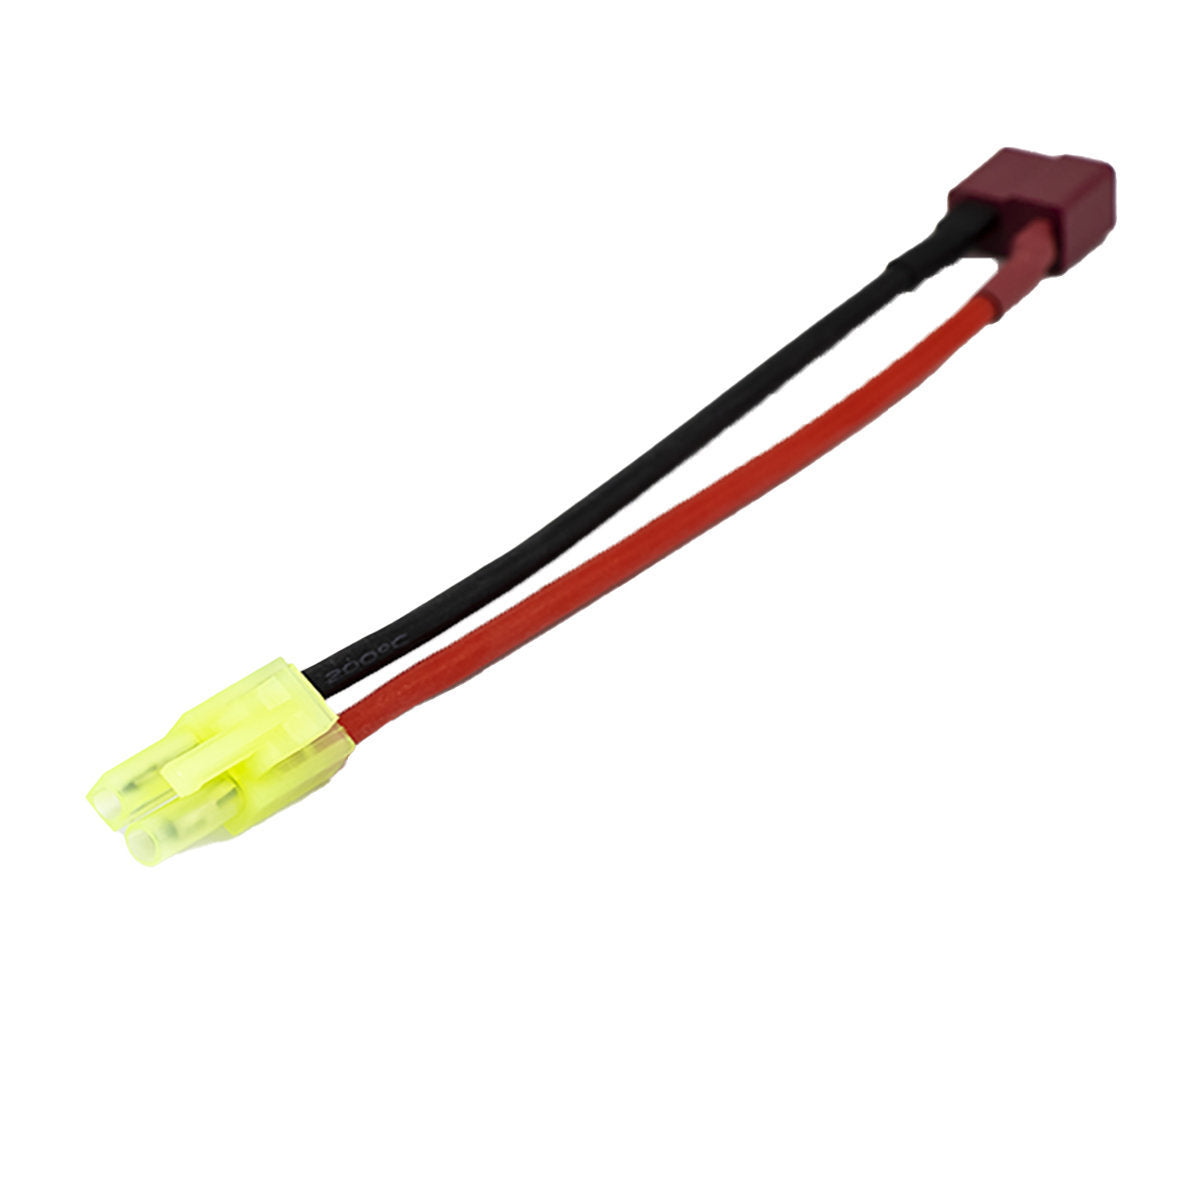 Valken Wiring Adapter - Female Deans to Small Male Tamiya - Eminent Paintball And Airsoft